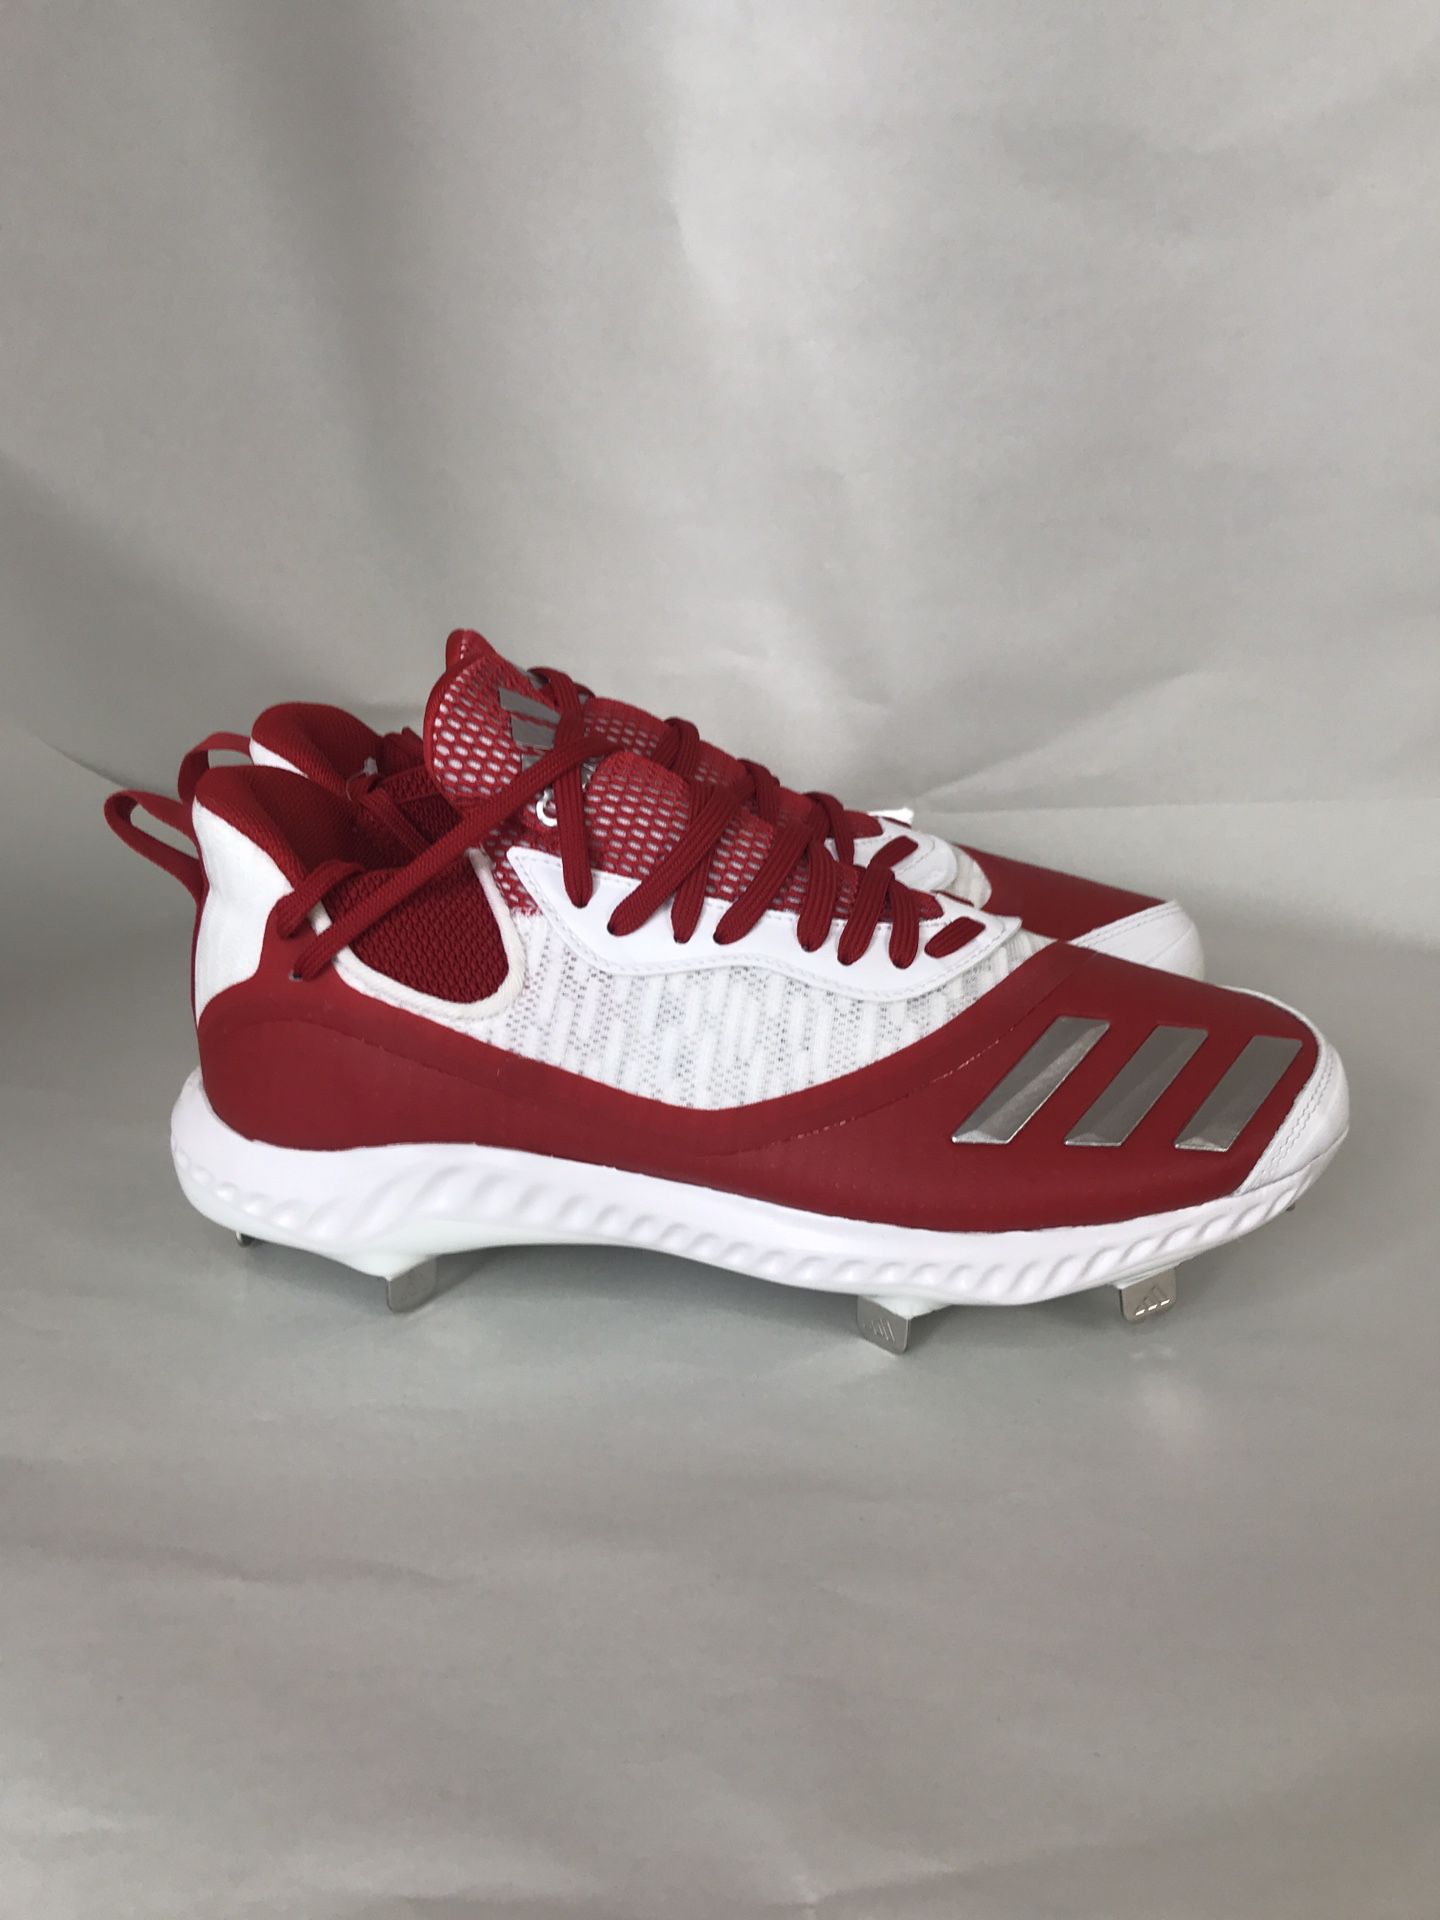 NEW Adidas Icon V Bounce Iced Out Mens Baseball Cleats Red/White EE4130 Size 9.5 New without box 